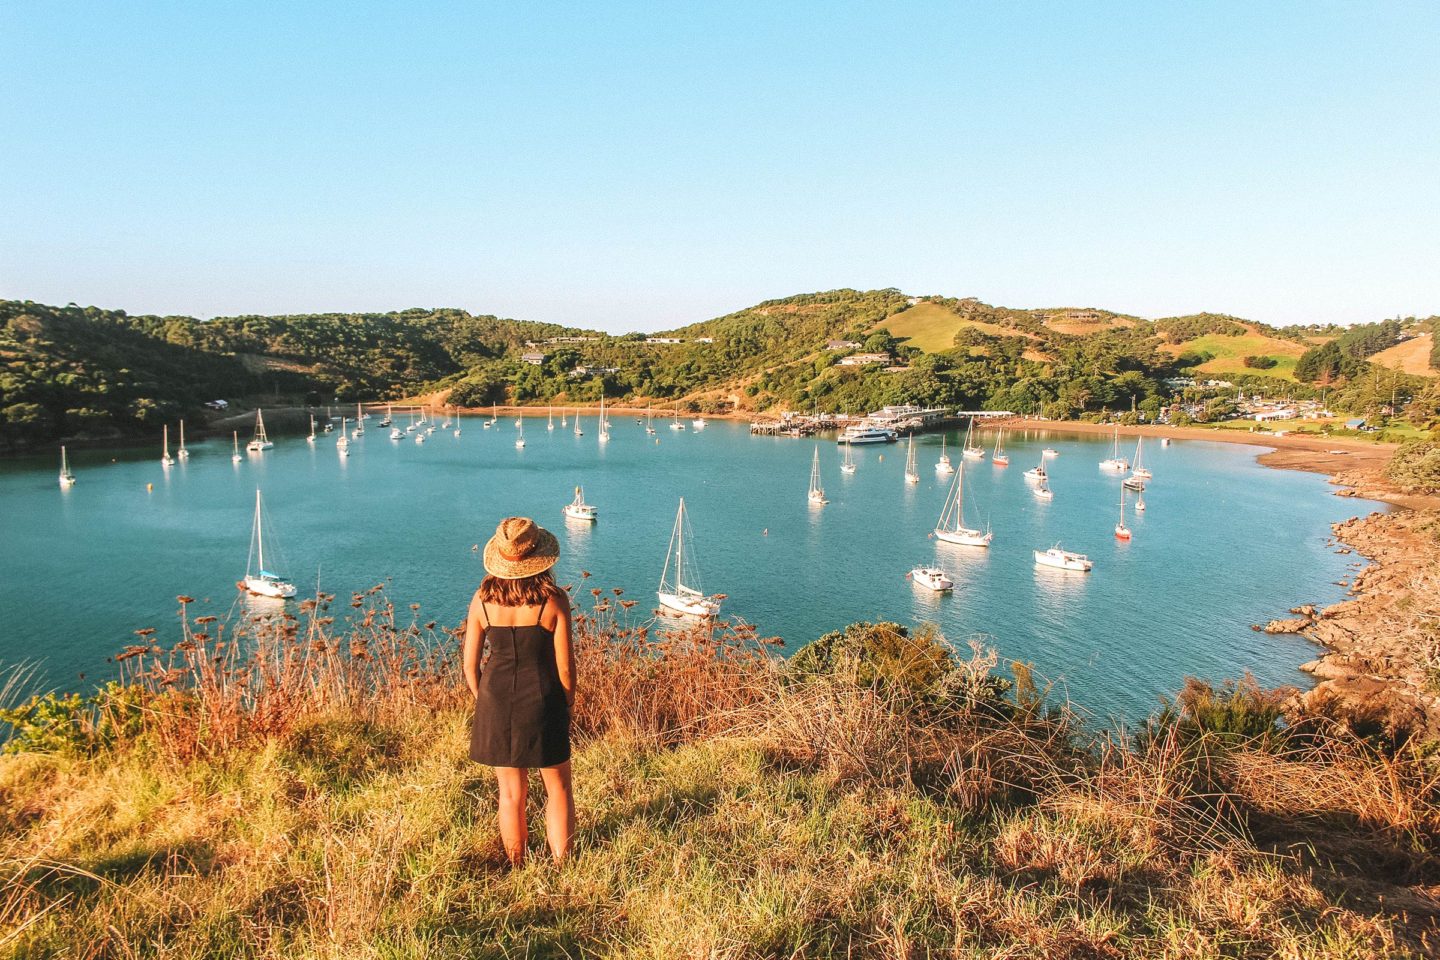 Auckland itinerary - perfect 1, 2 or 3 days in Auckland